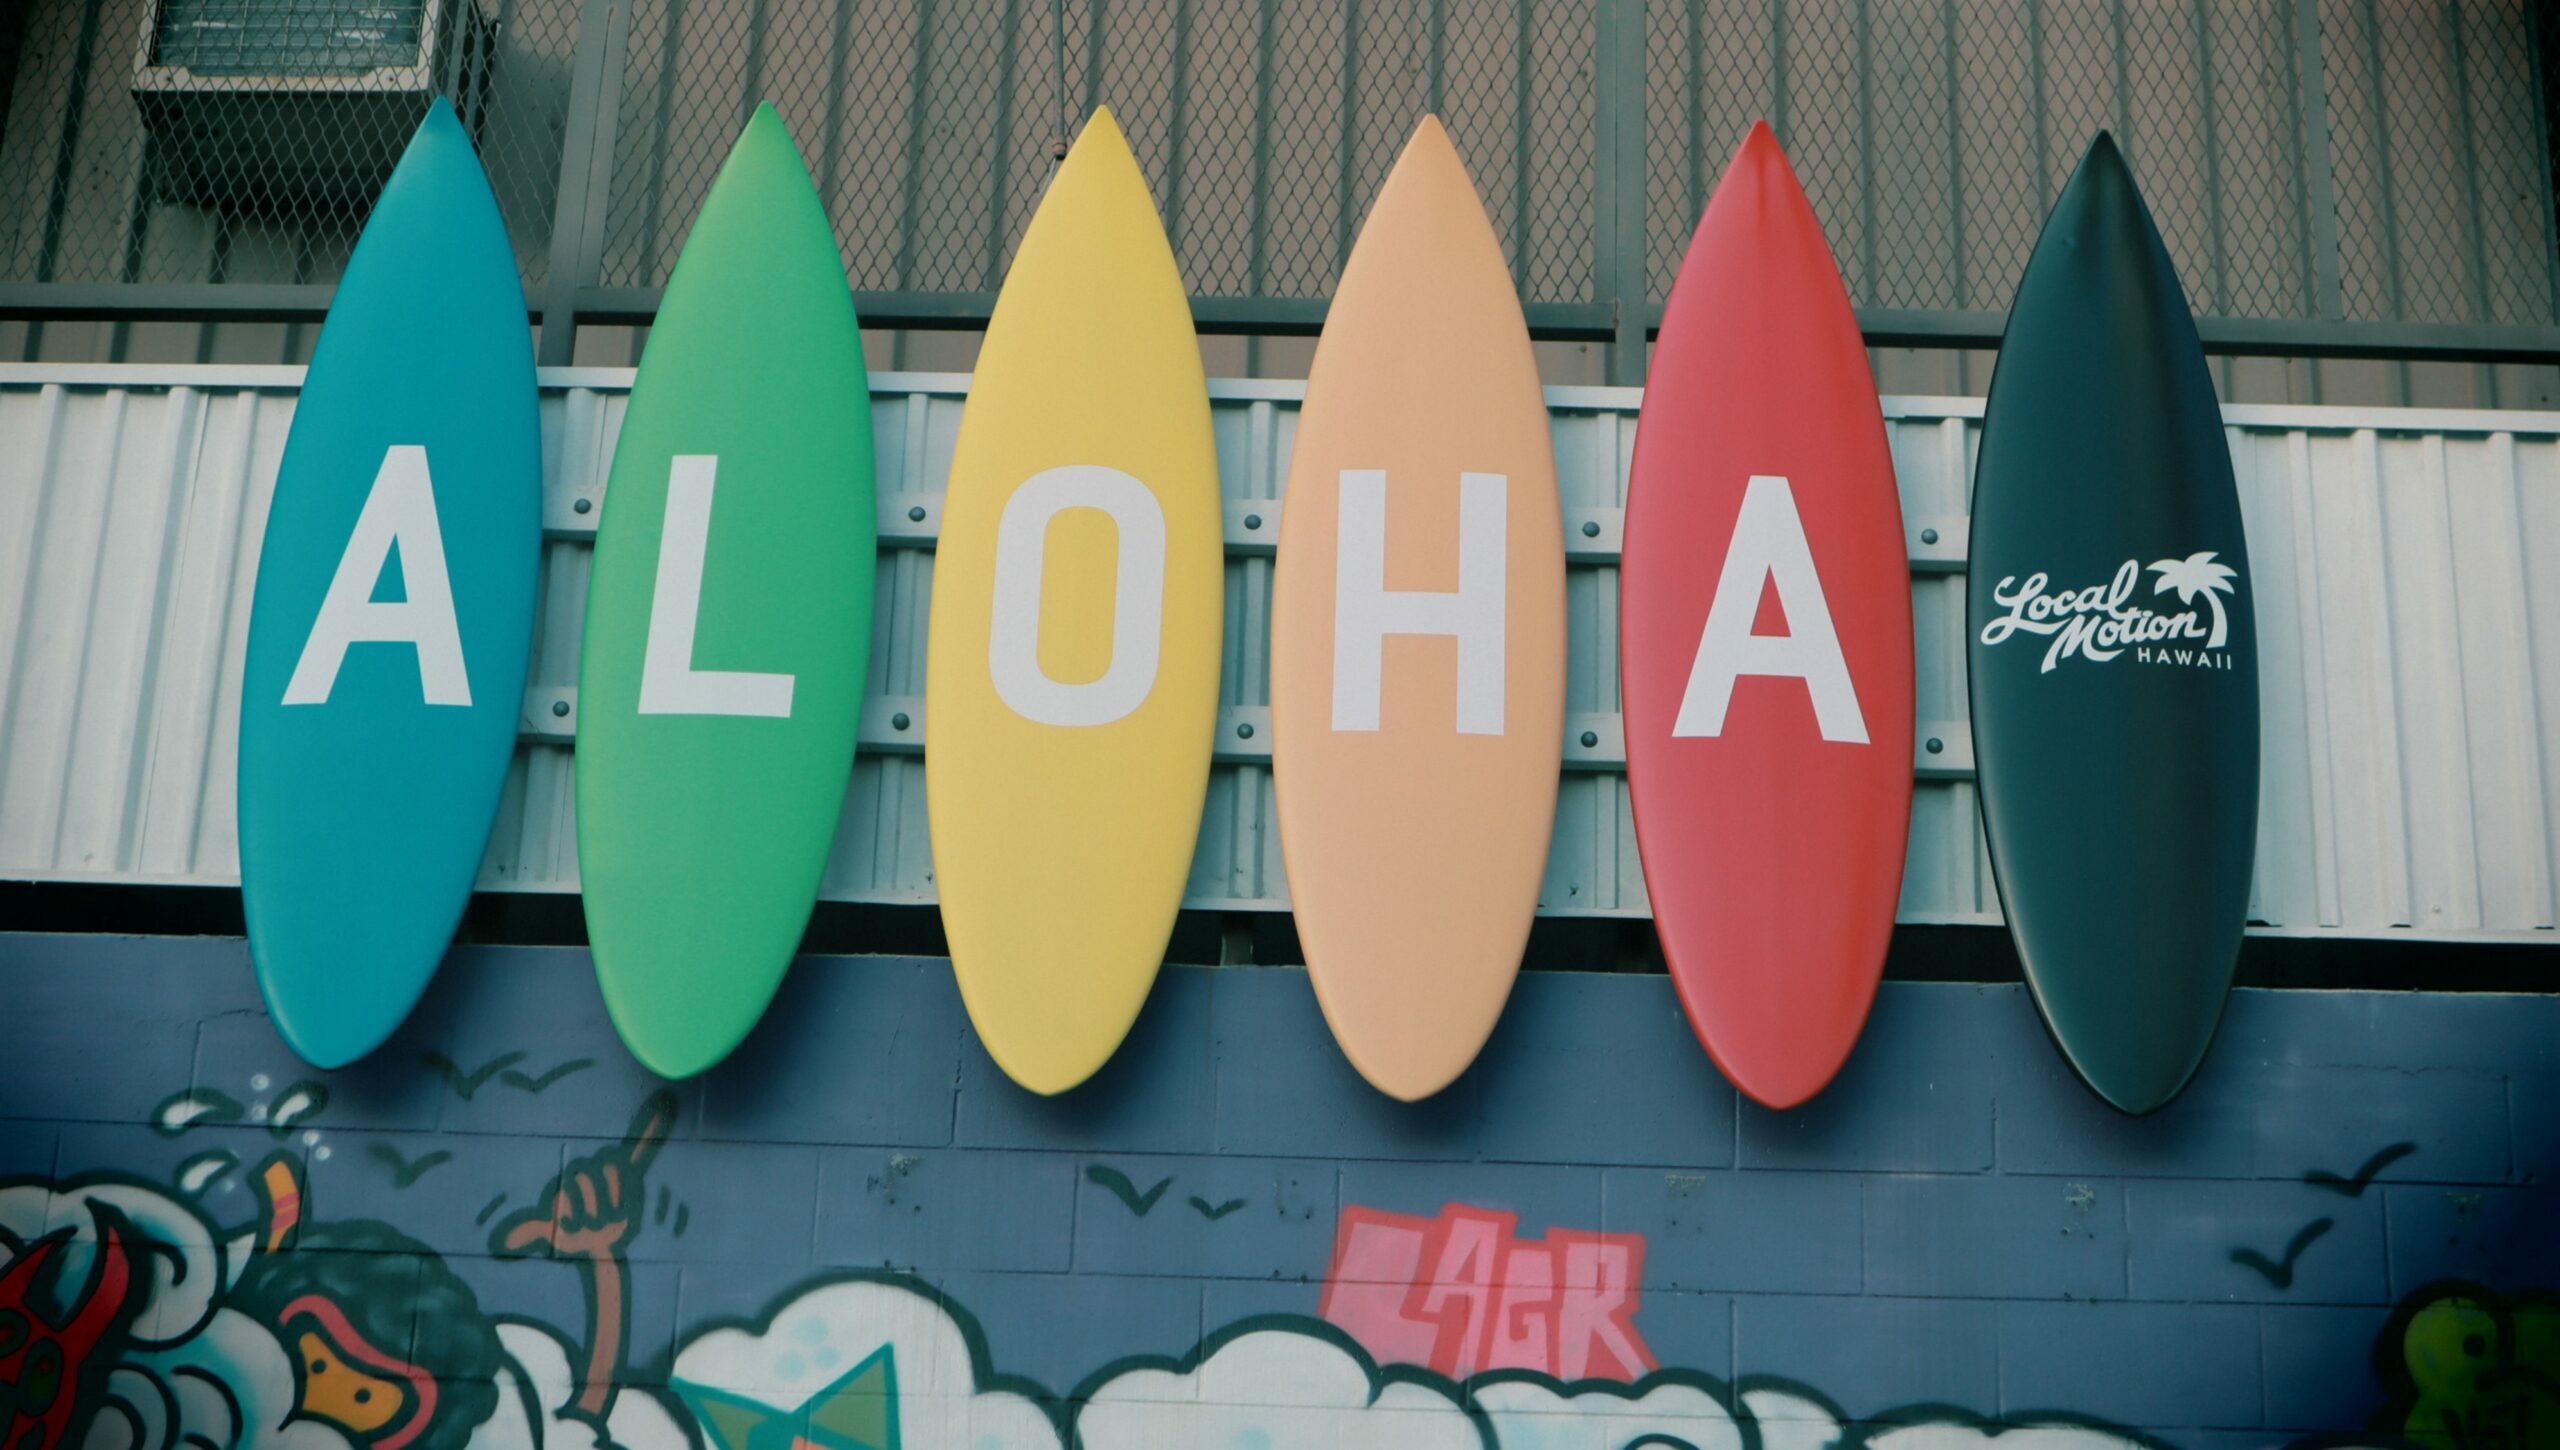 Aloha sign at the Local Motion surf shop in Honolulu, Hawaii.